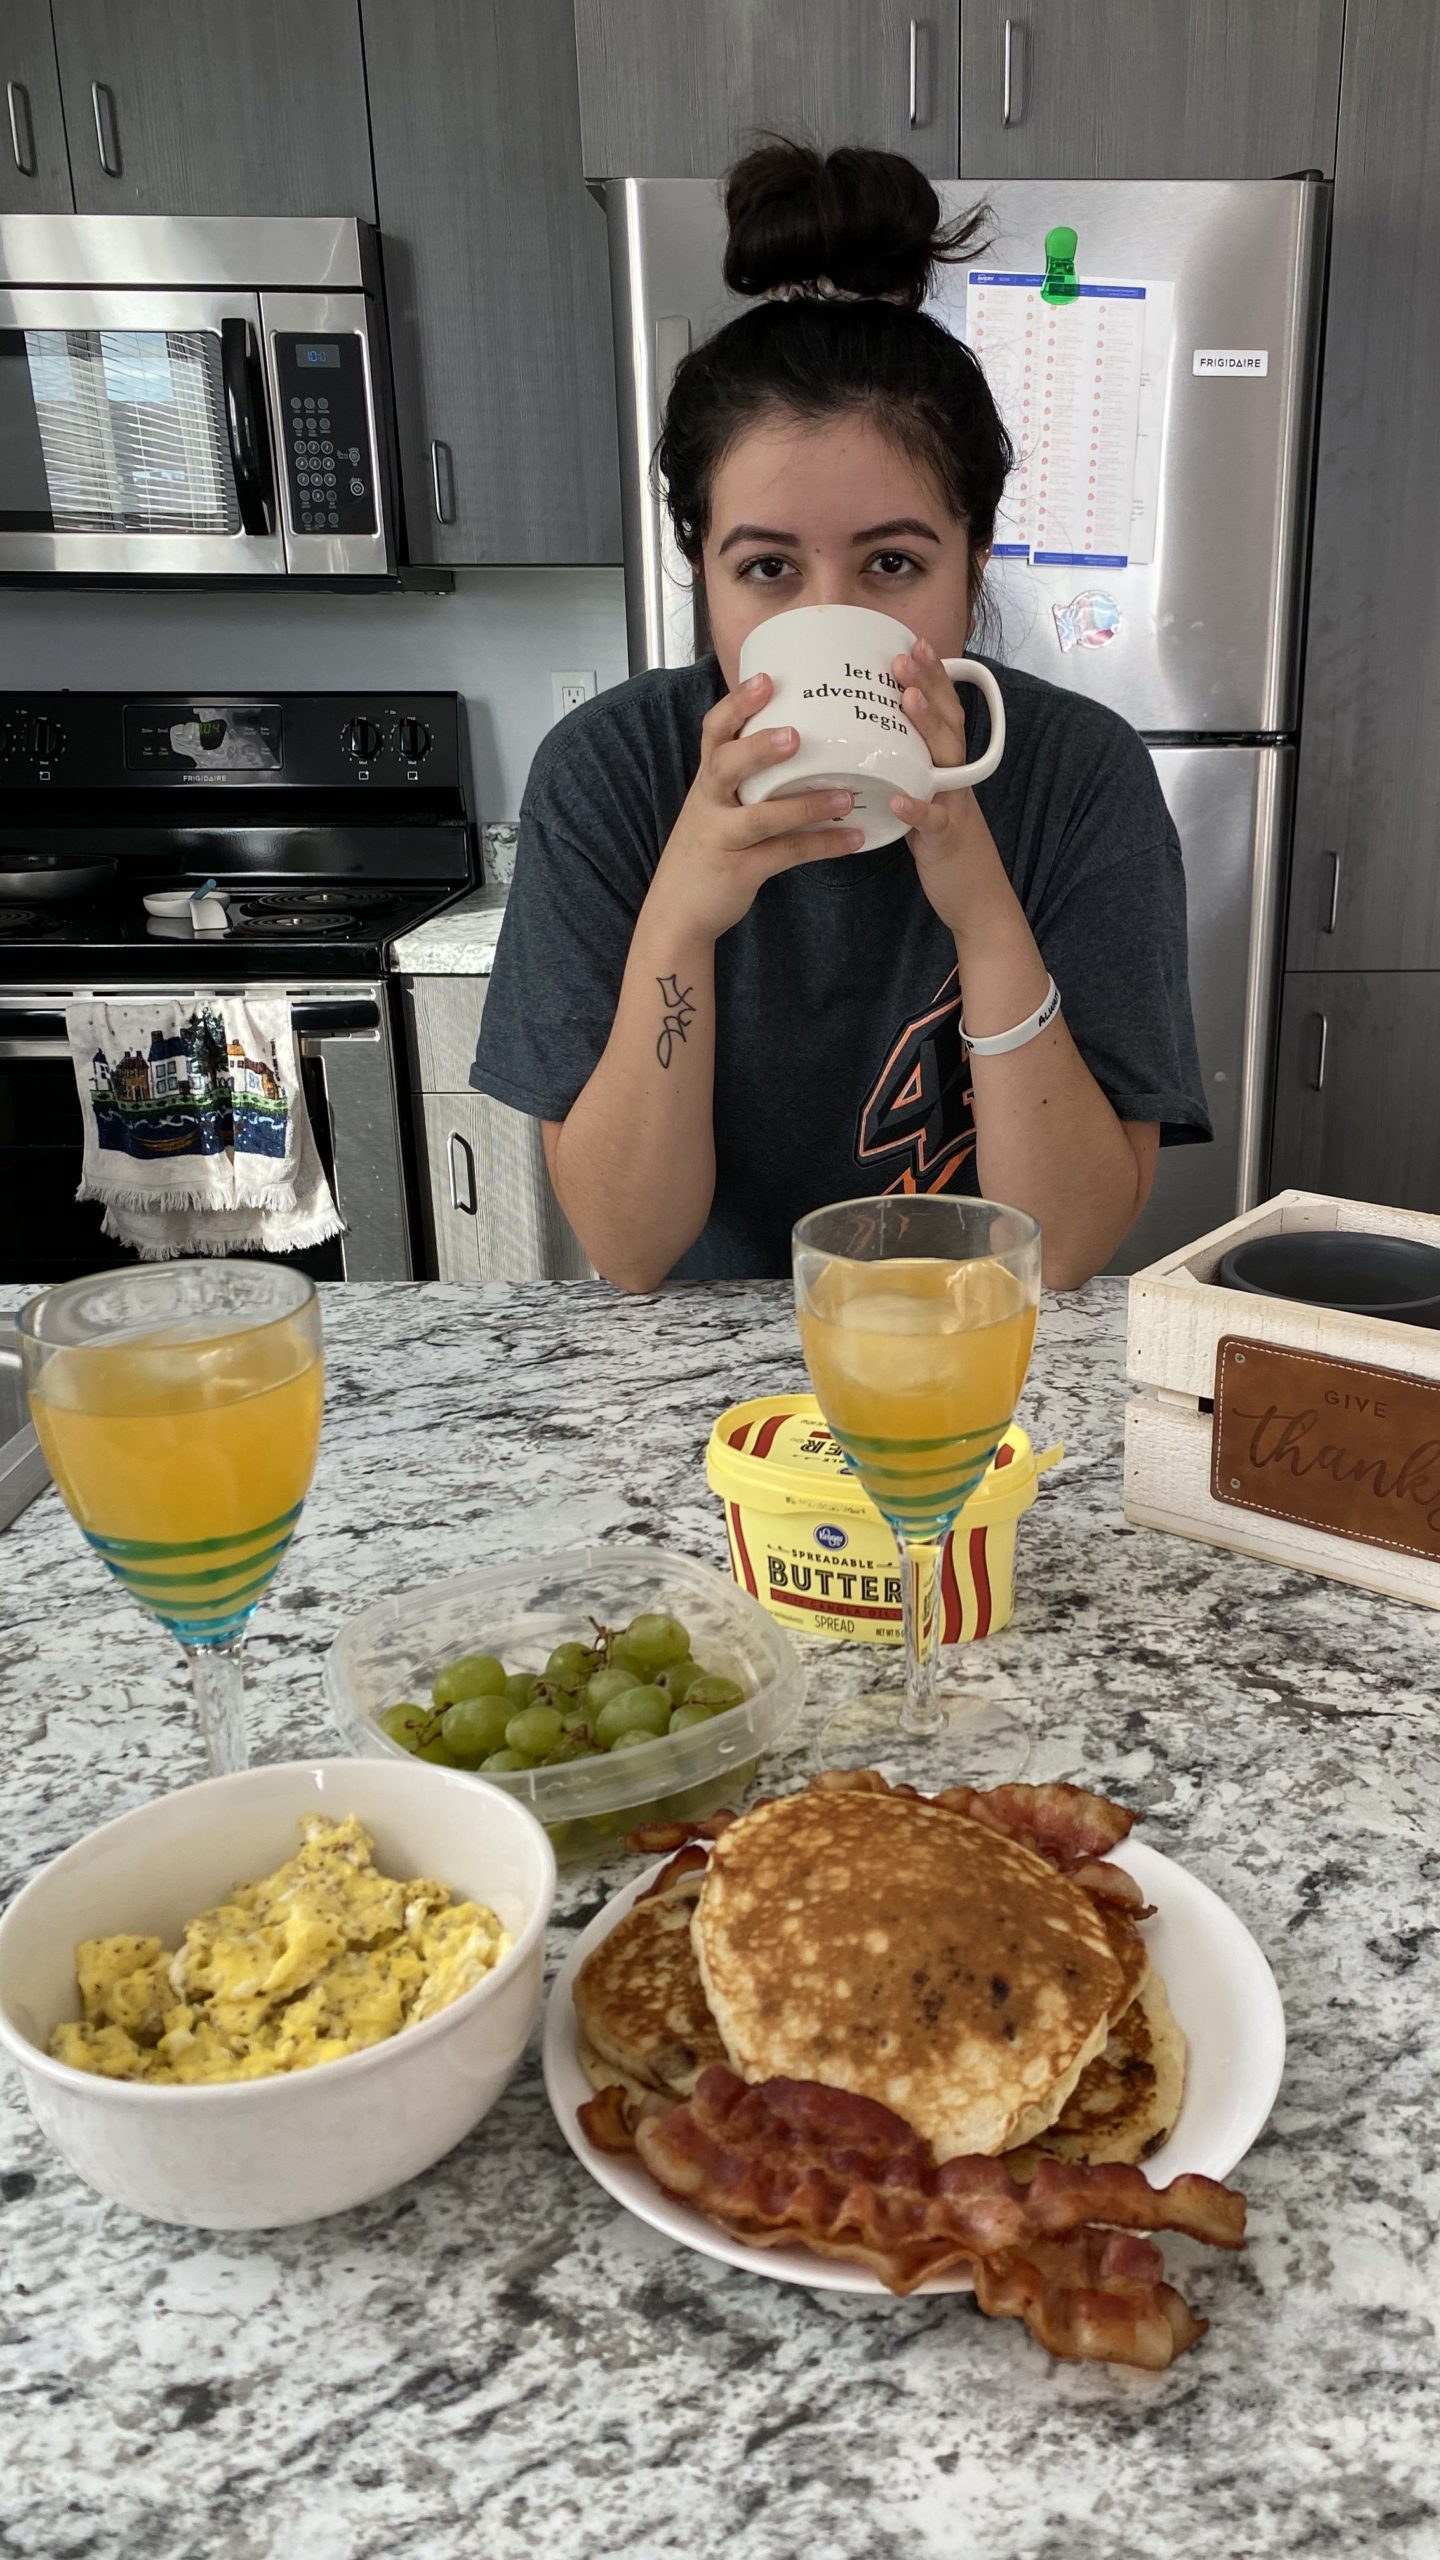 Ada drinking coffee, hair in a bun, and an oversized t-shirt, standing behind the counter where our brunch of eggs, pancakes, and bacon with a side of grapes and juice are laid out. 